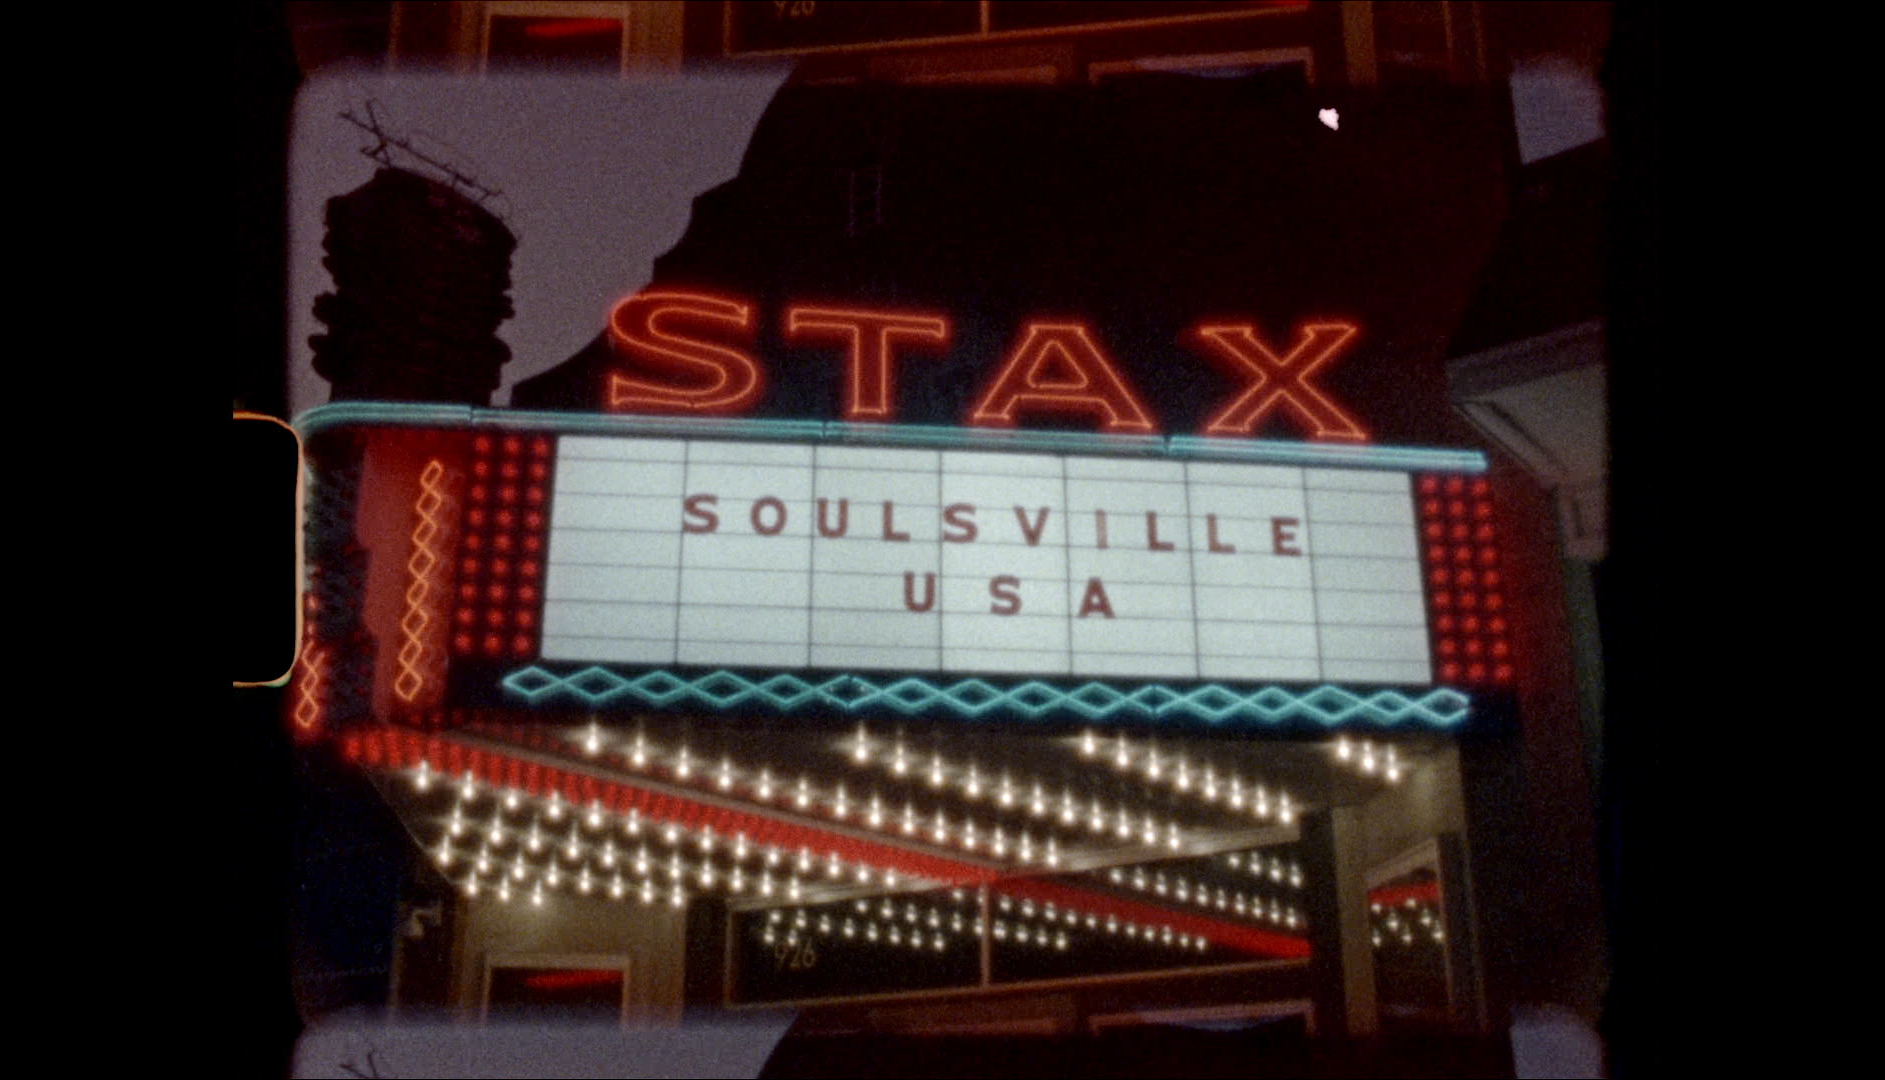 Featured image for “HBO ORIGINAL DOCUMENTARY SERIES STAX: SOULSVILLE U.S.A. DEBUTS MAY 20”